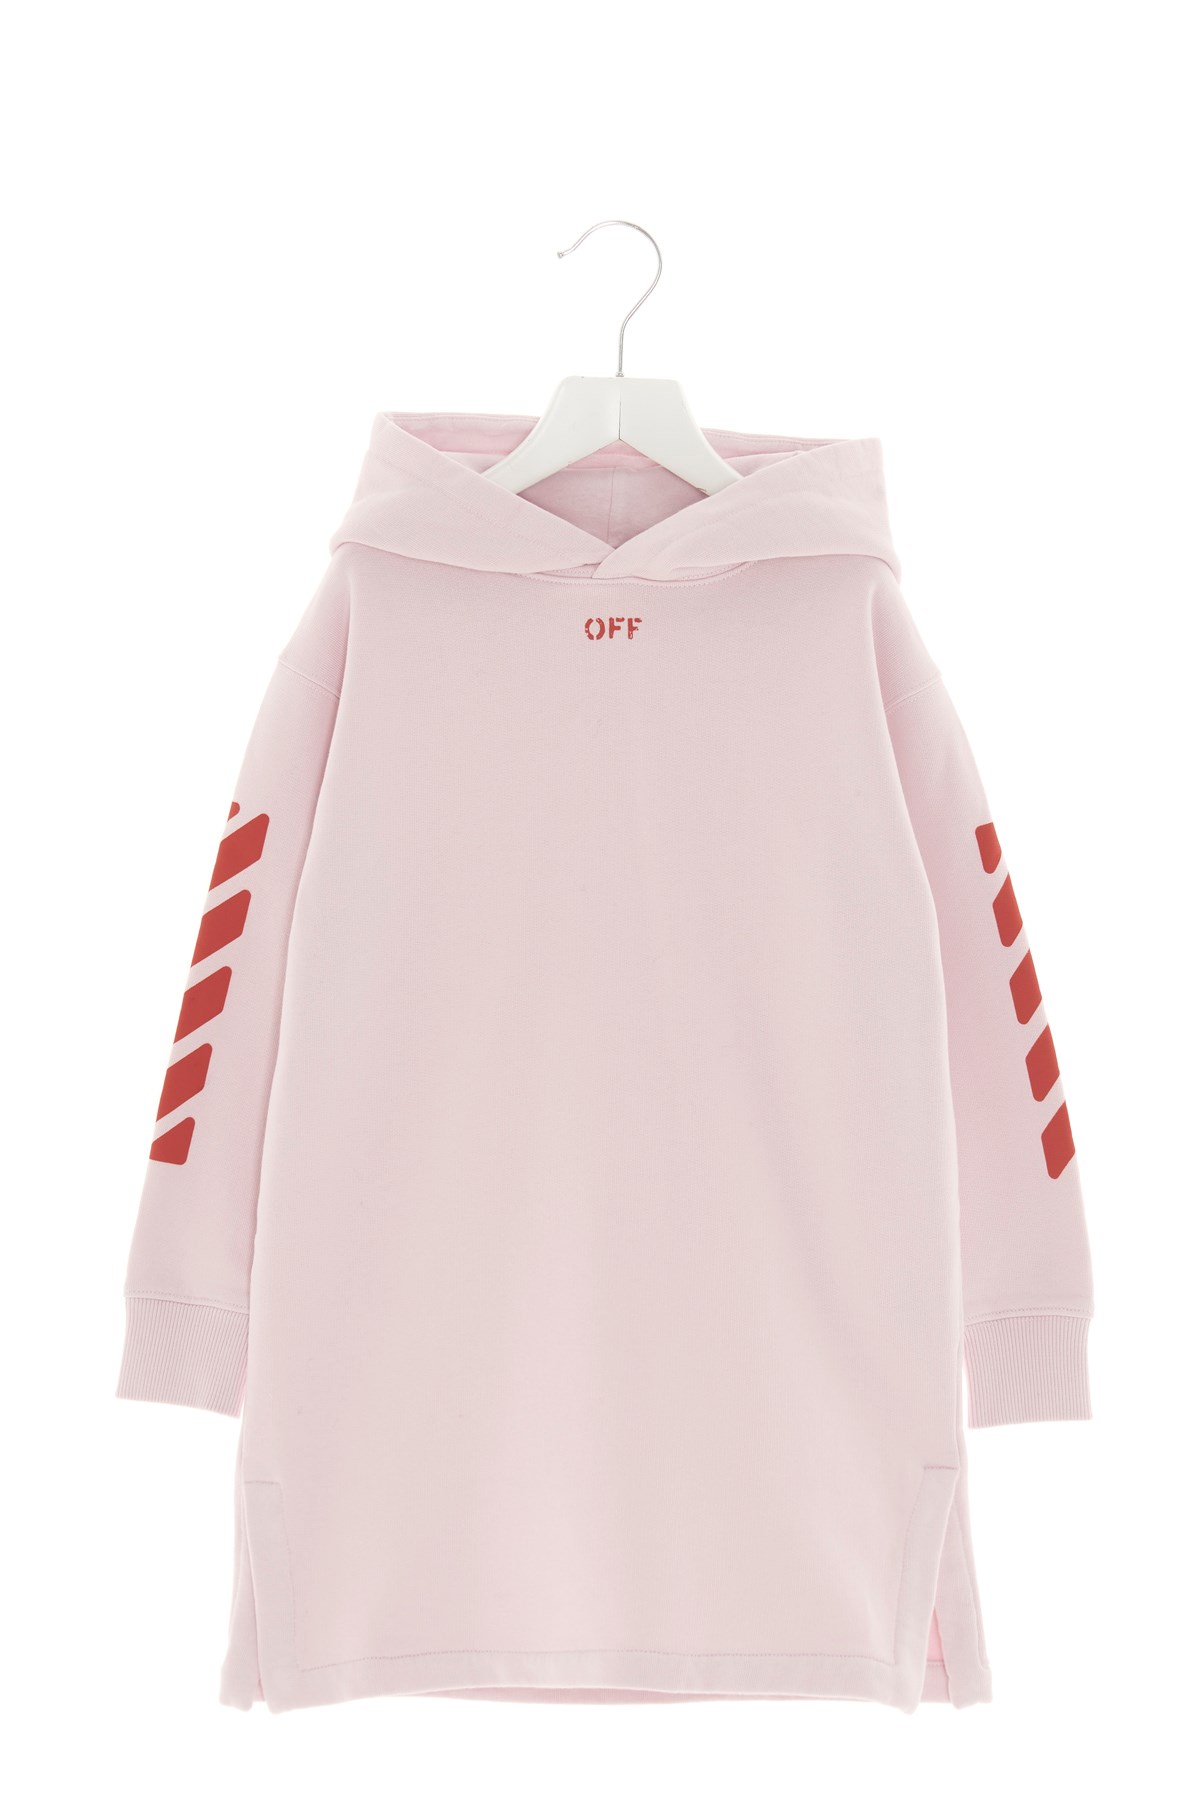 OFF-WHITE 'Off Stamp’ Hooded Dress